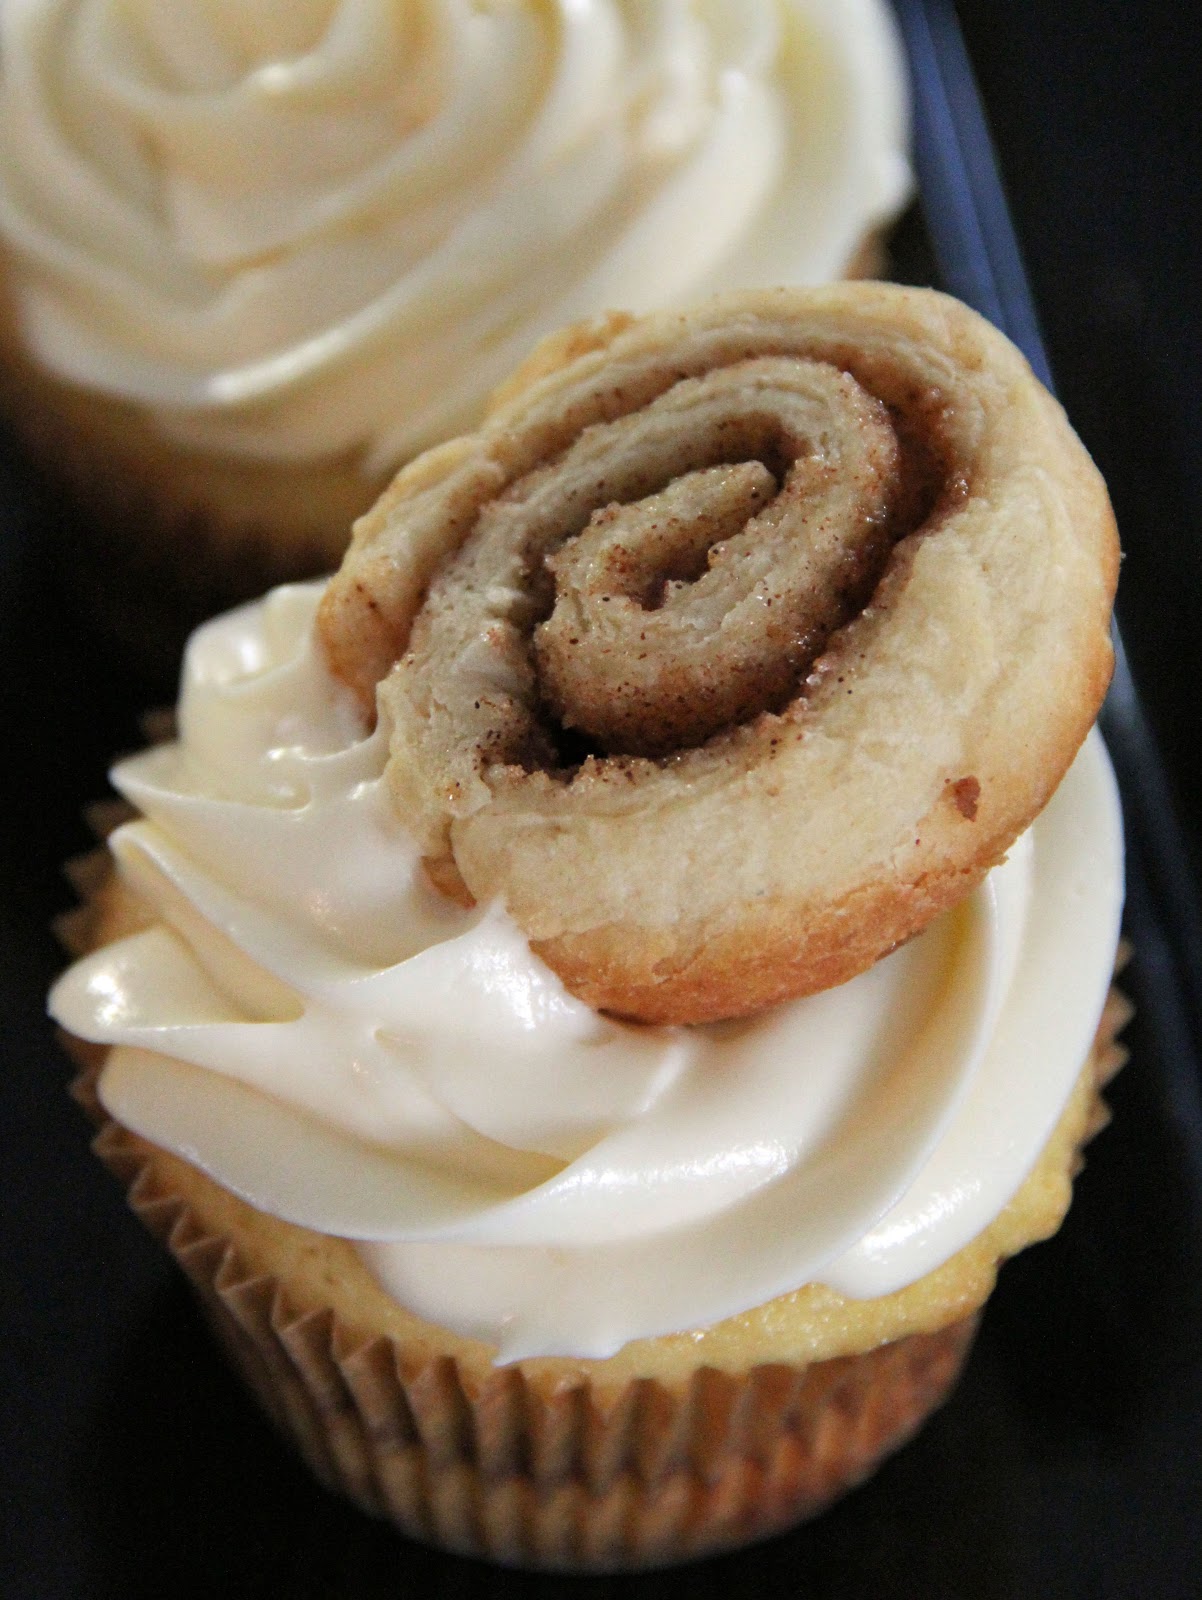 Jo and Sue: Cinnamon Bun Cupcake with Cheesecake Frosting